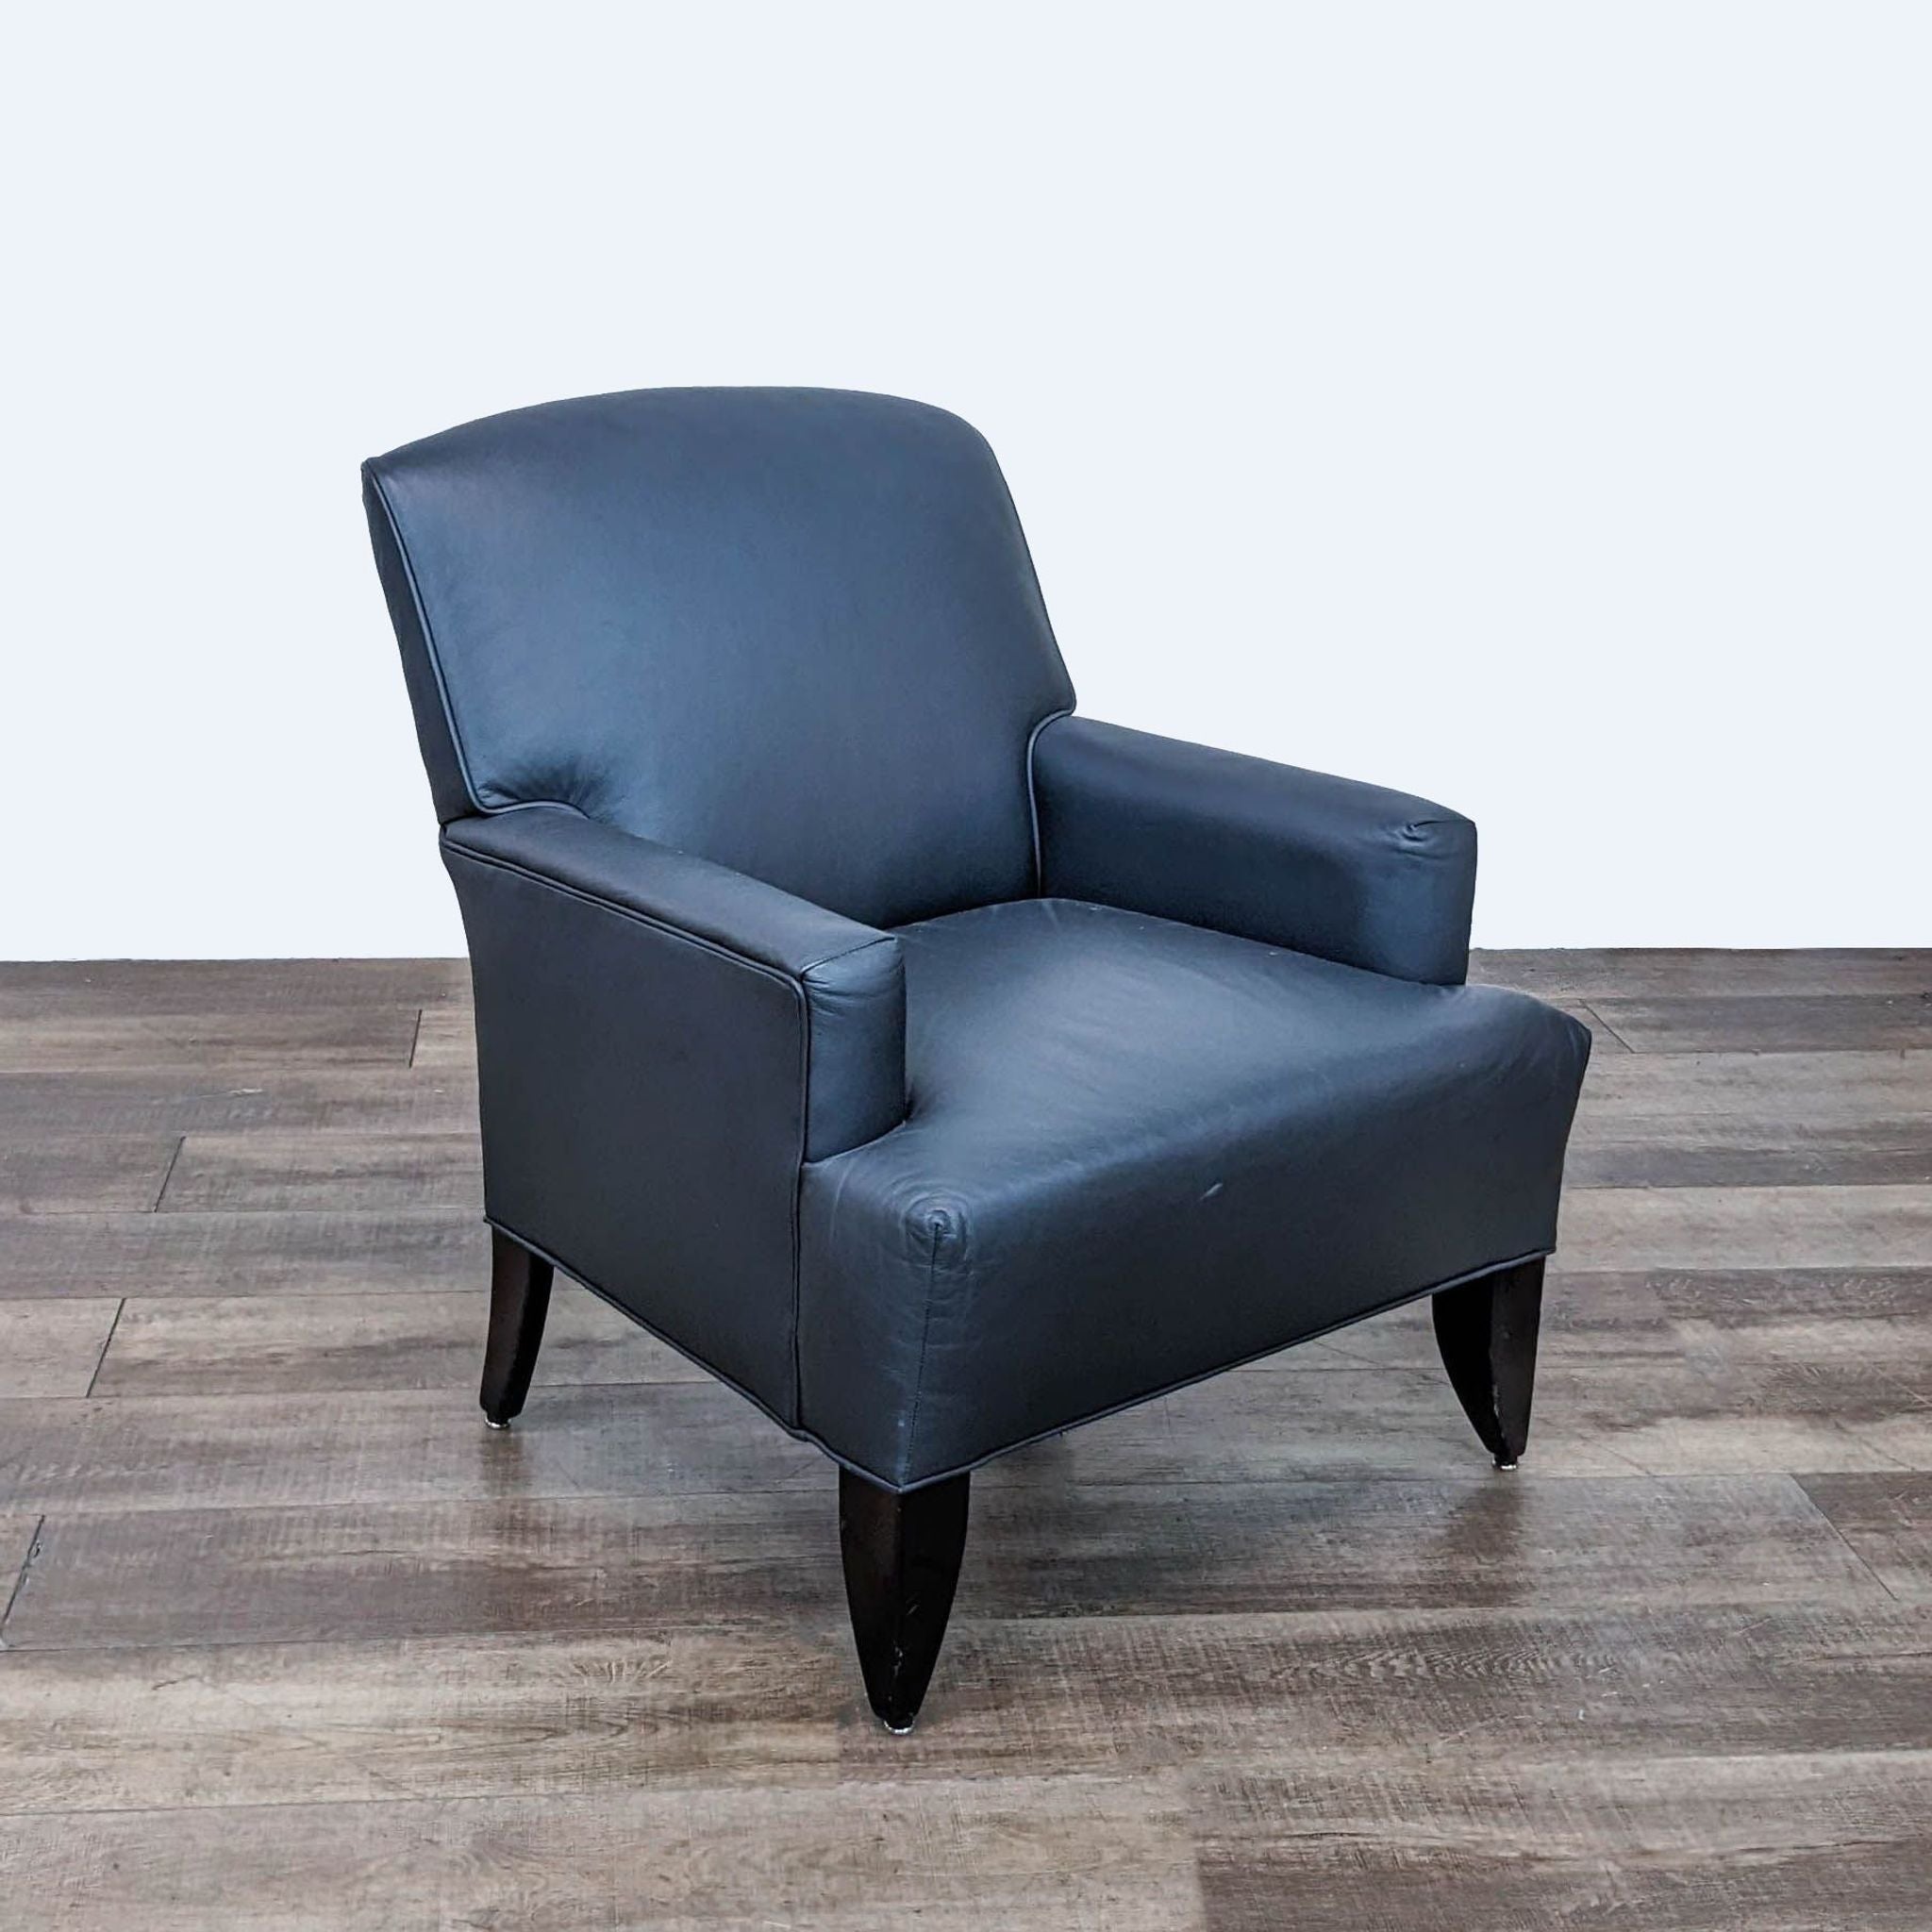 Reperch brand navy leather club chair with arched back and tapered wooden feet on a wood floor.